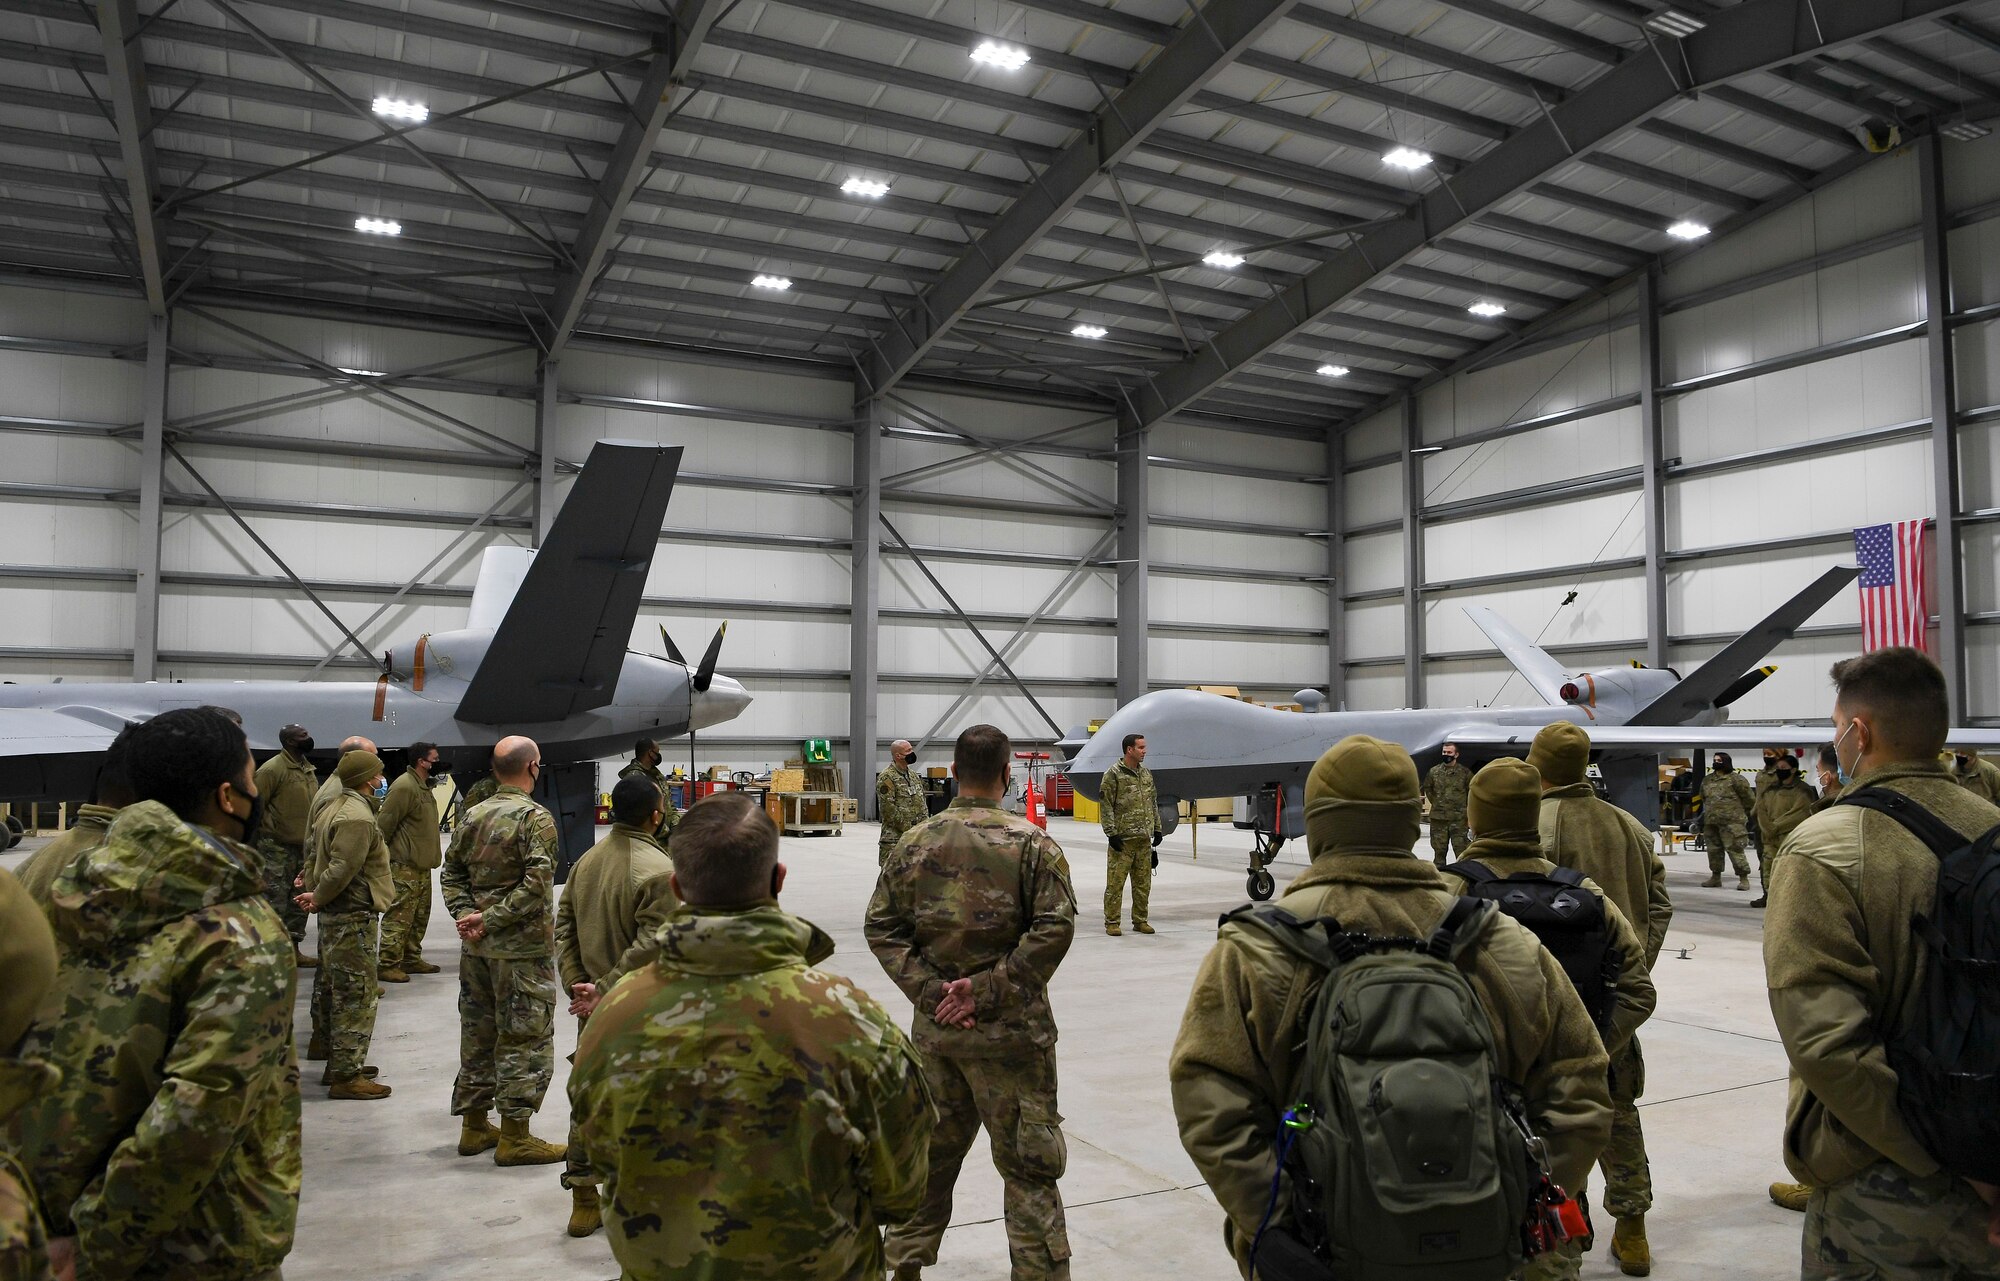 The recent MQ-9 Reaper aircraft presence here demonstrates the United States’ commitment to the security and stability of Europe, and aims to strengthen relationships between NATO allies and other European partners.